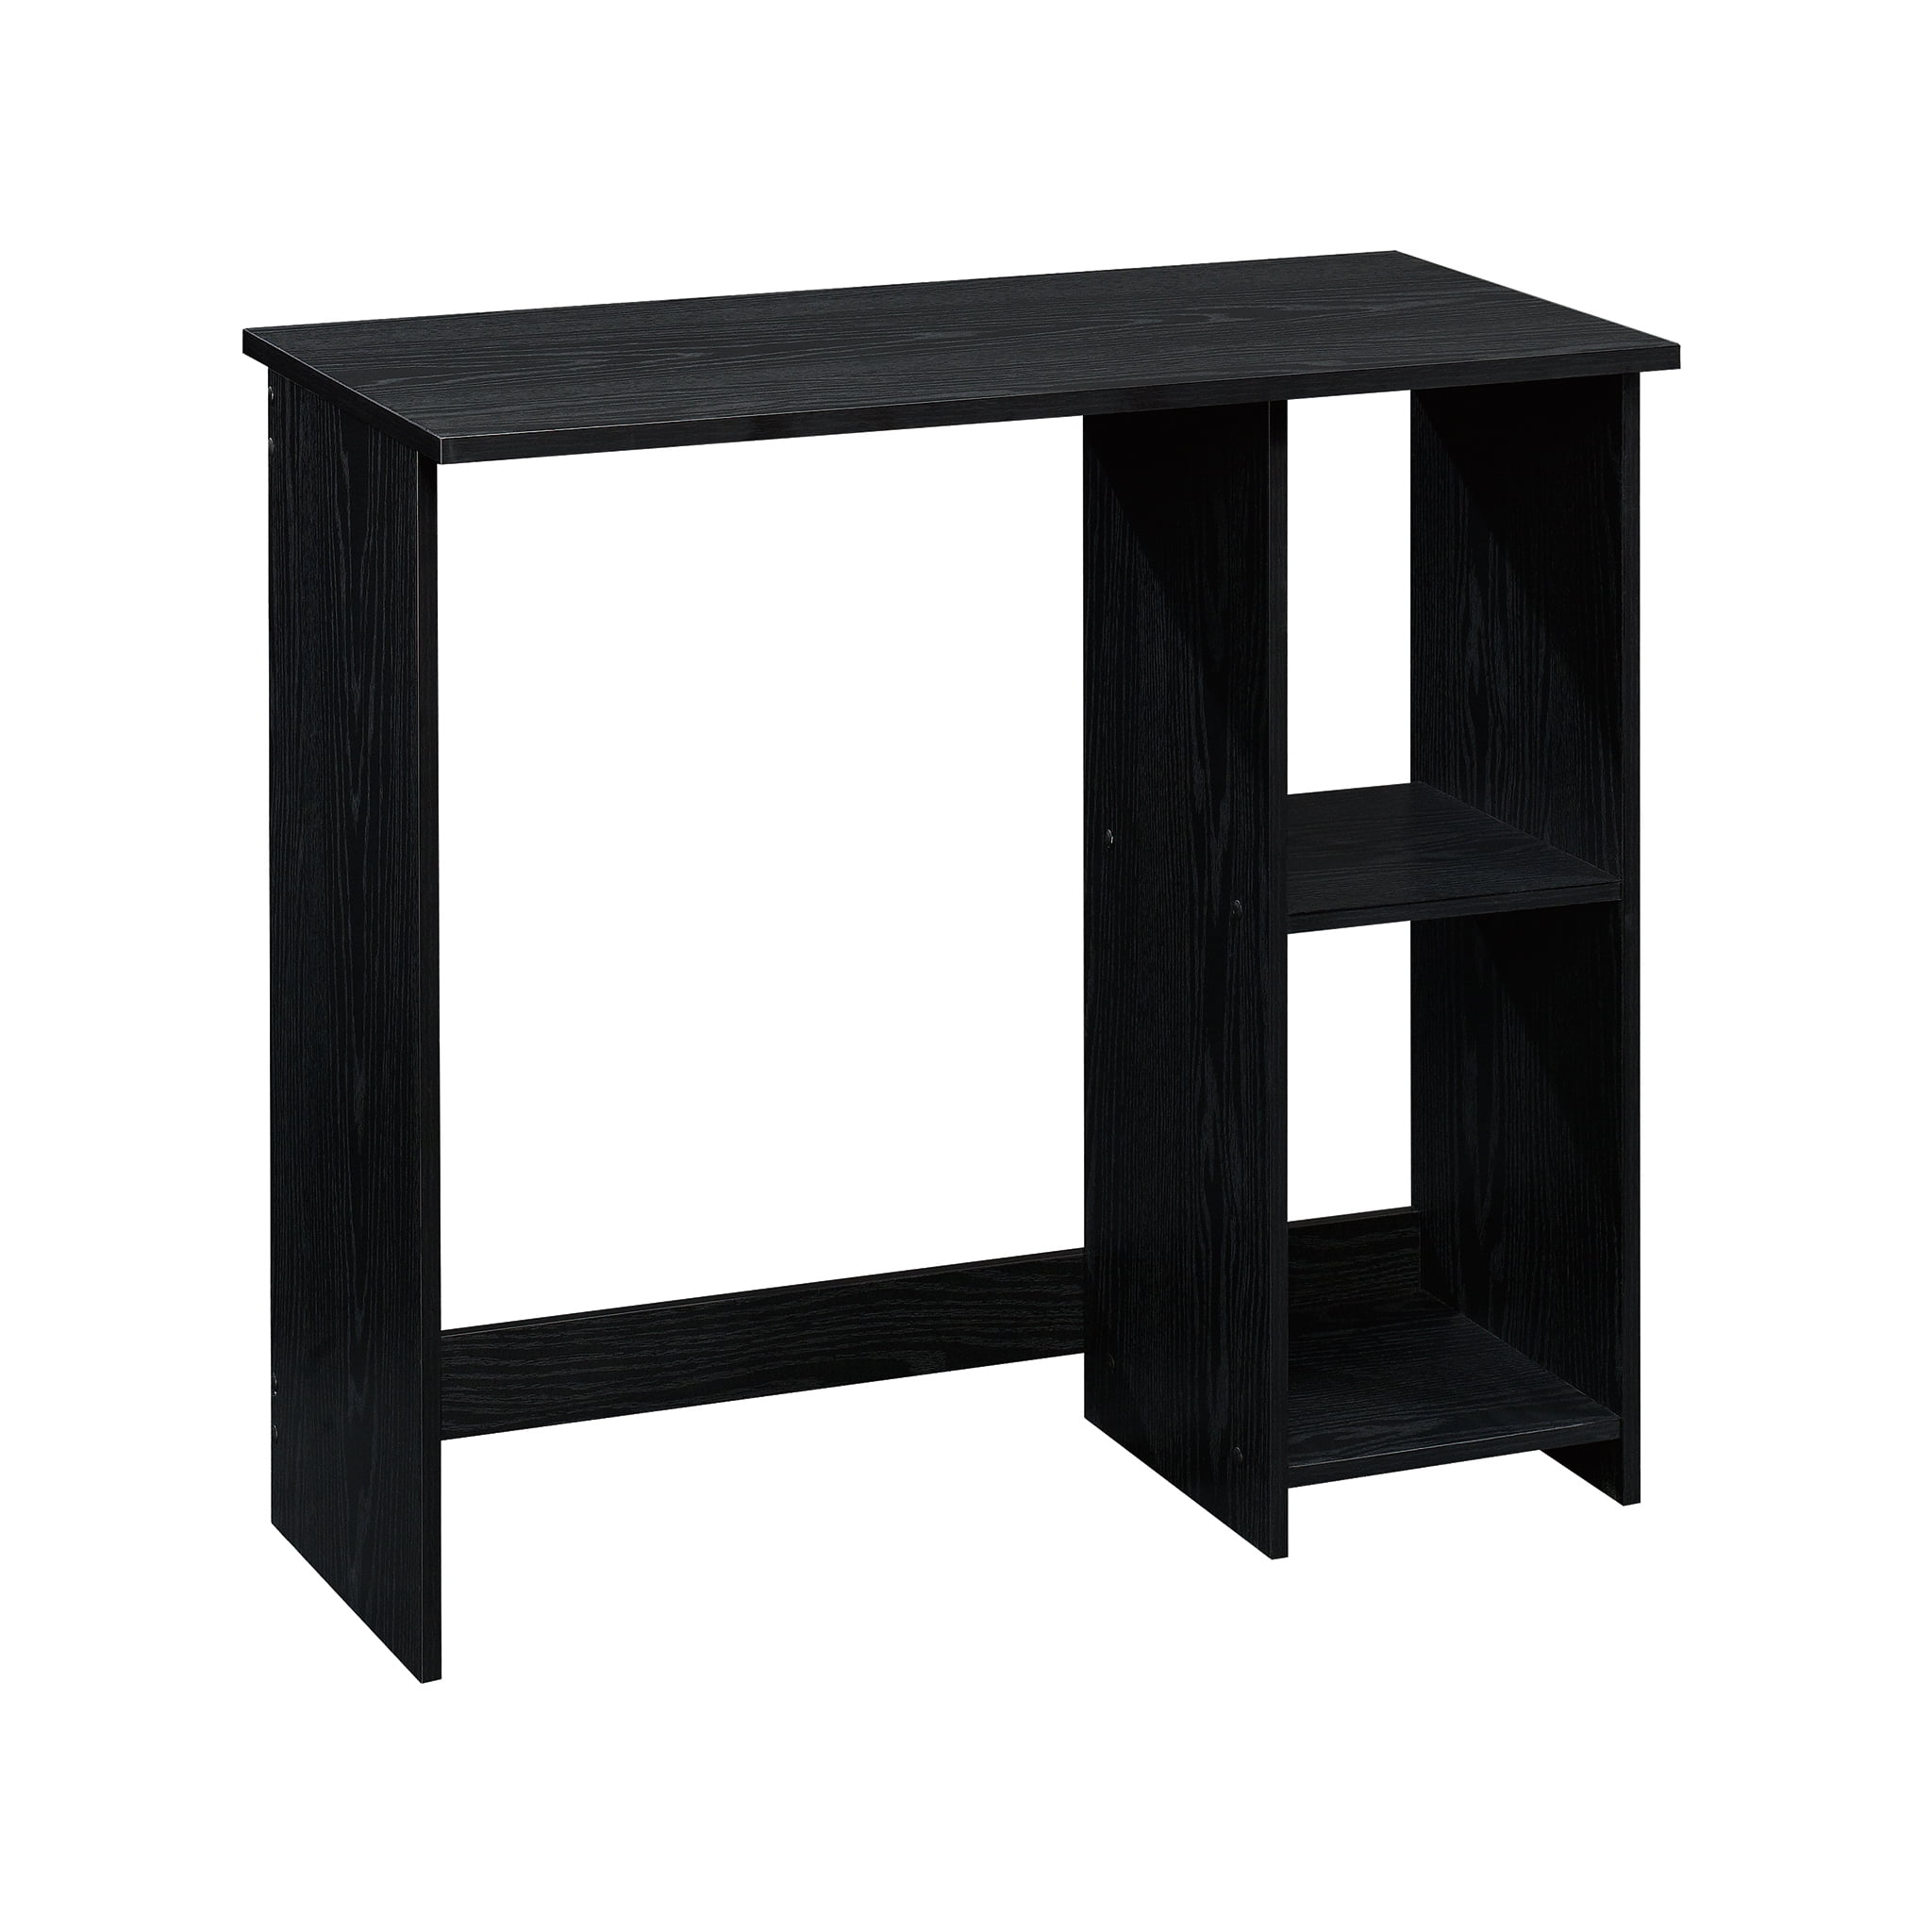 Mainstays Small Space Writing Desk with 2 Shelves, True Black Oak Finish